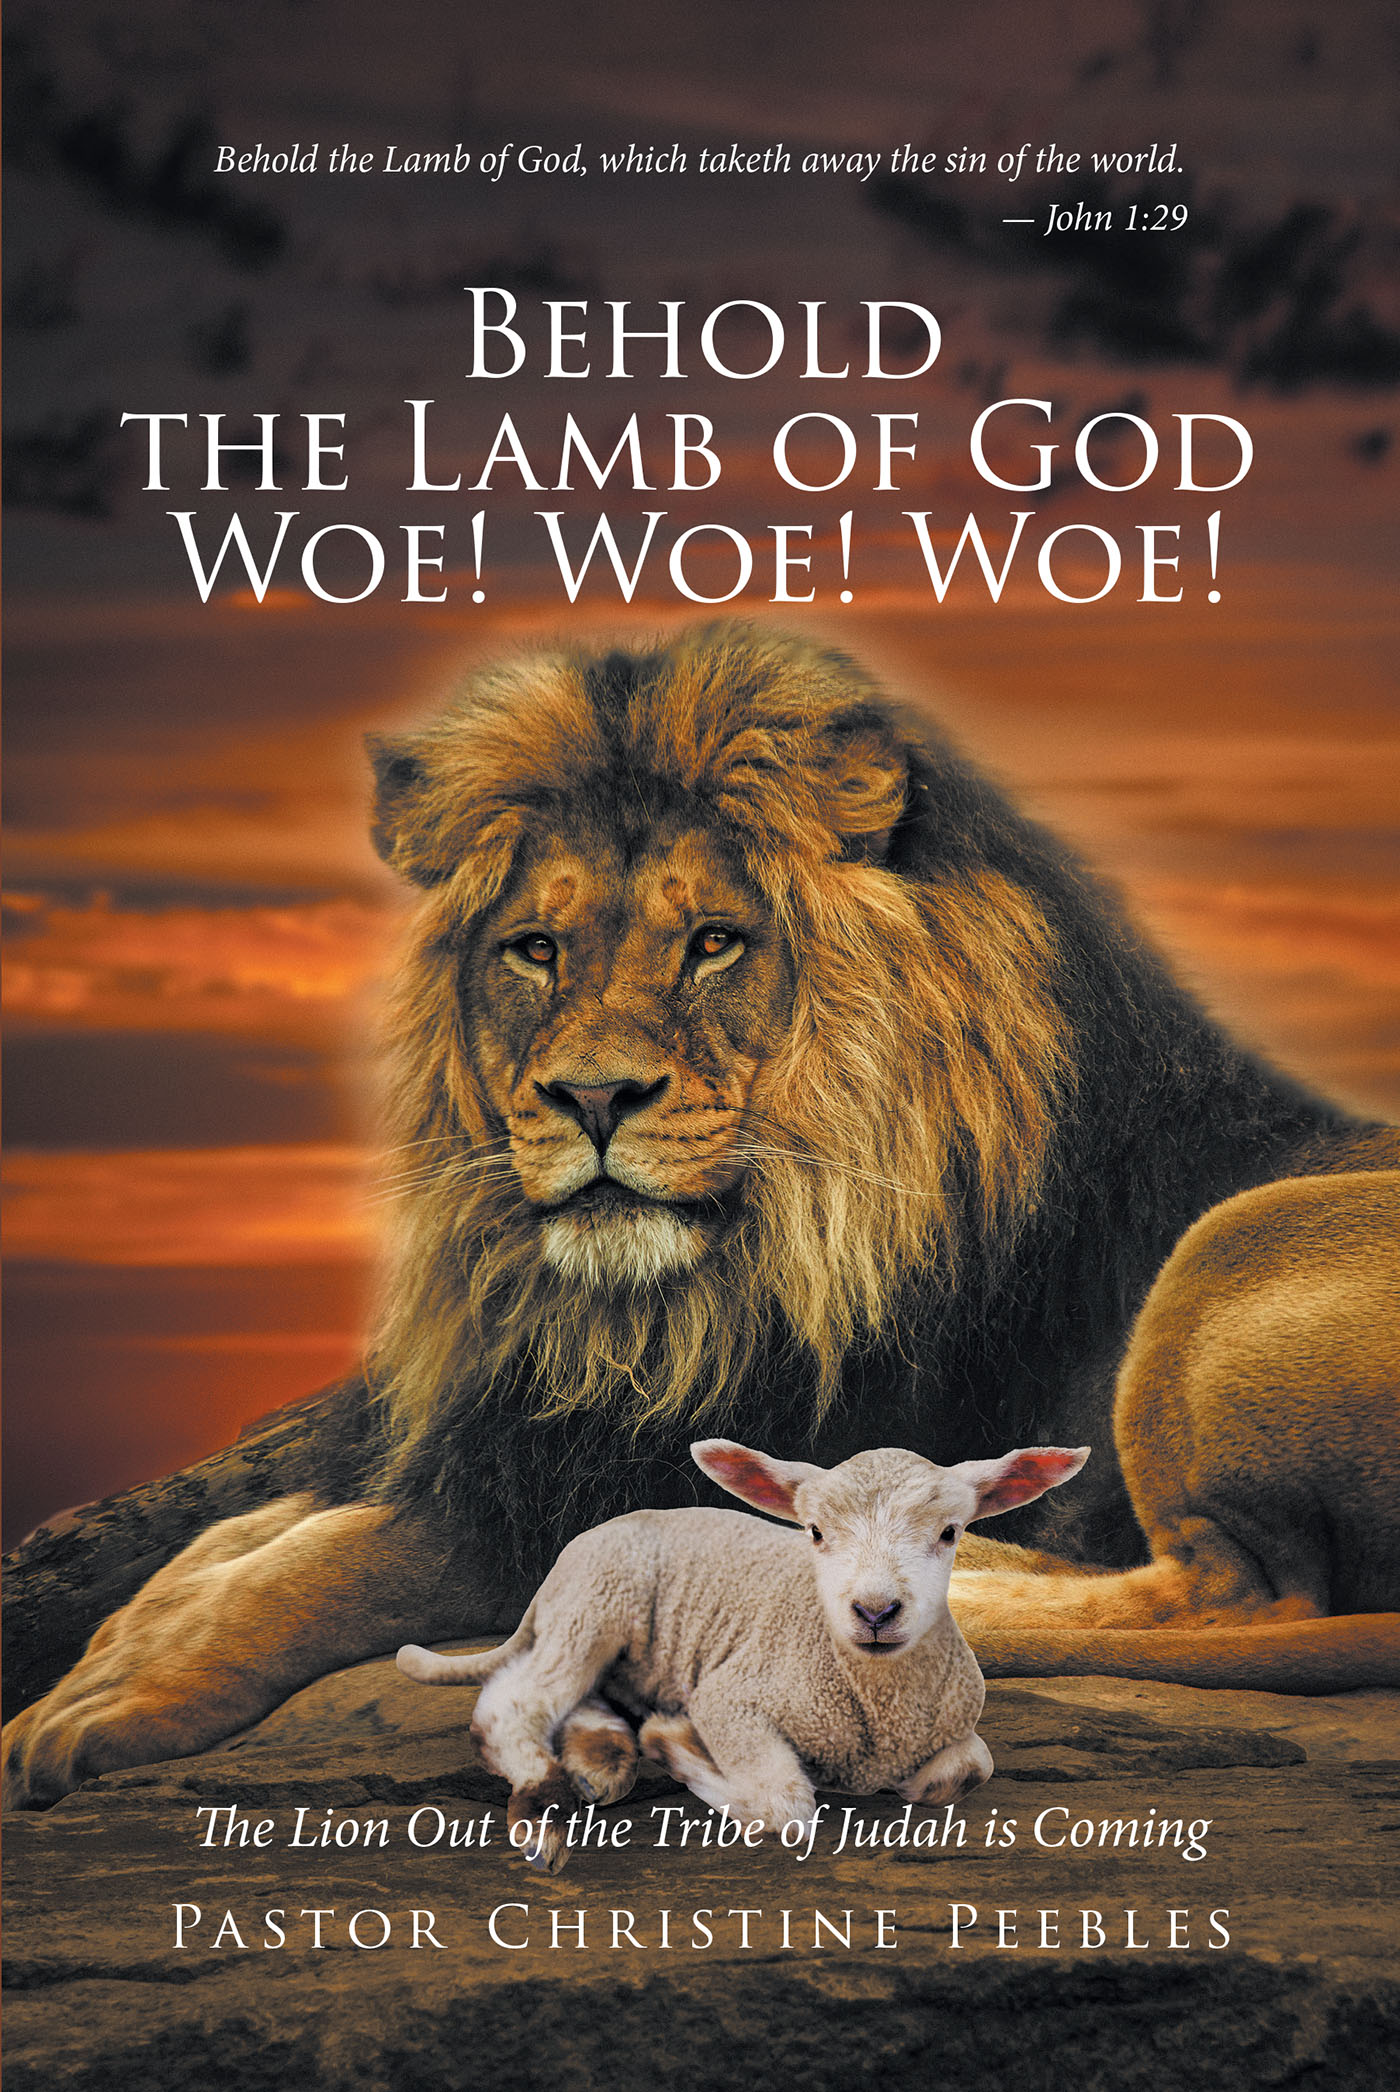 Pastor Christine Peebles’s Newly Released “Behold the Lamb of God Woe! Woe! Woe! The Lion Out of the Tribe of Judah is Coming” is an Informative Discussion of Jesus